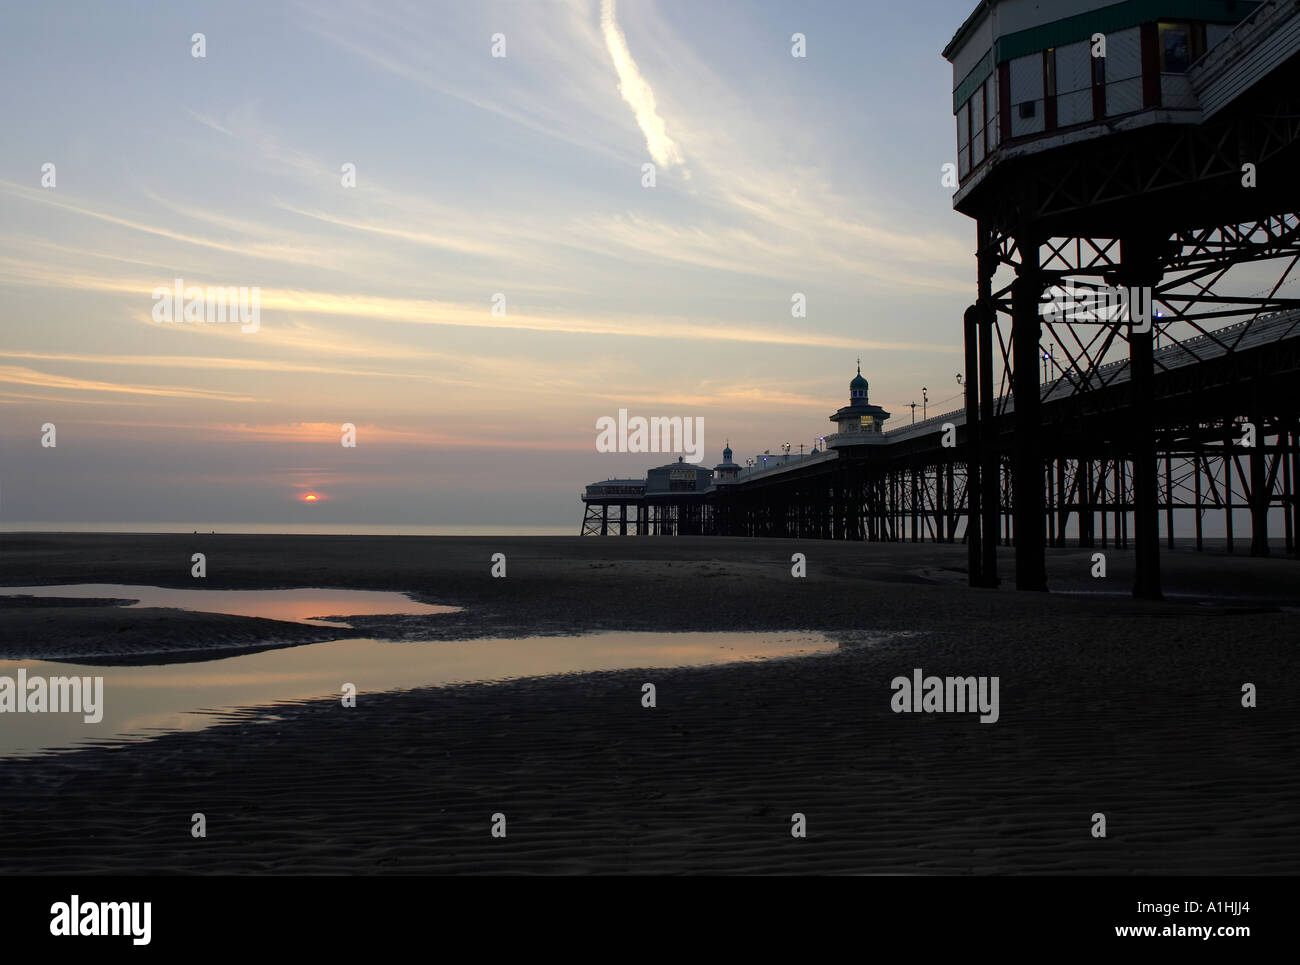 Blackpool North Pier at sunset england uk Banque D'Images